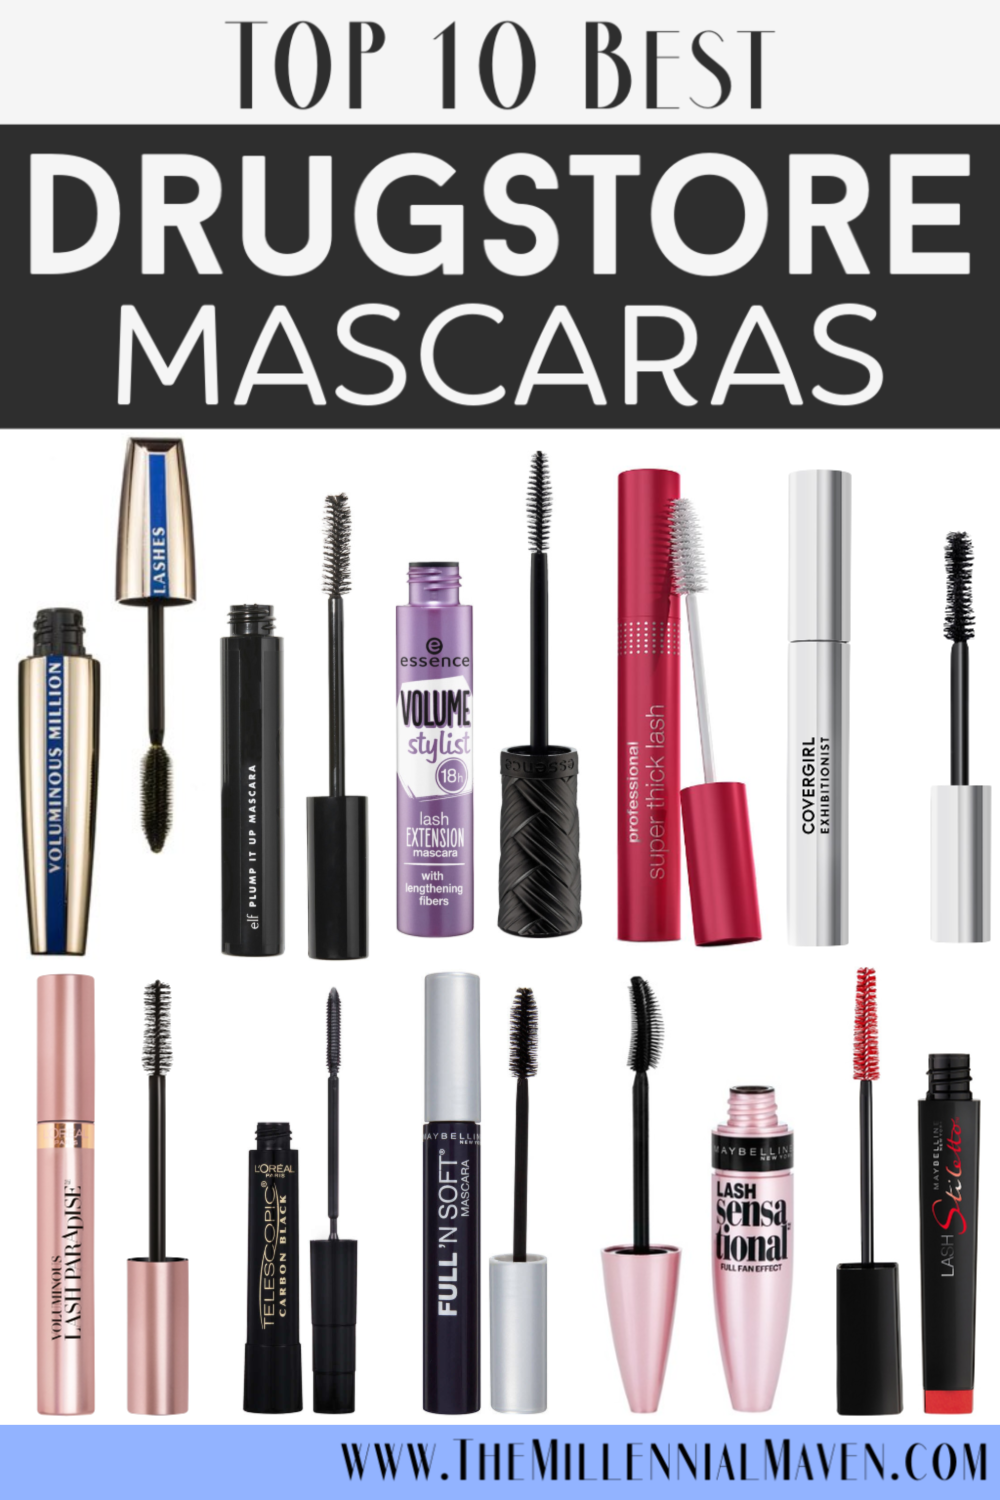 Top 10 Best Mascaras at the Drugstore in 2021! | Drugstore Mascaras